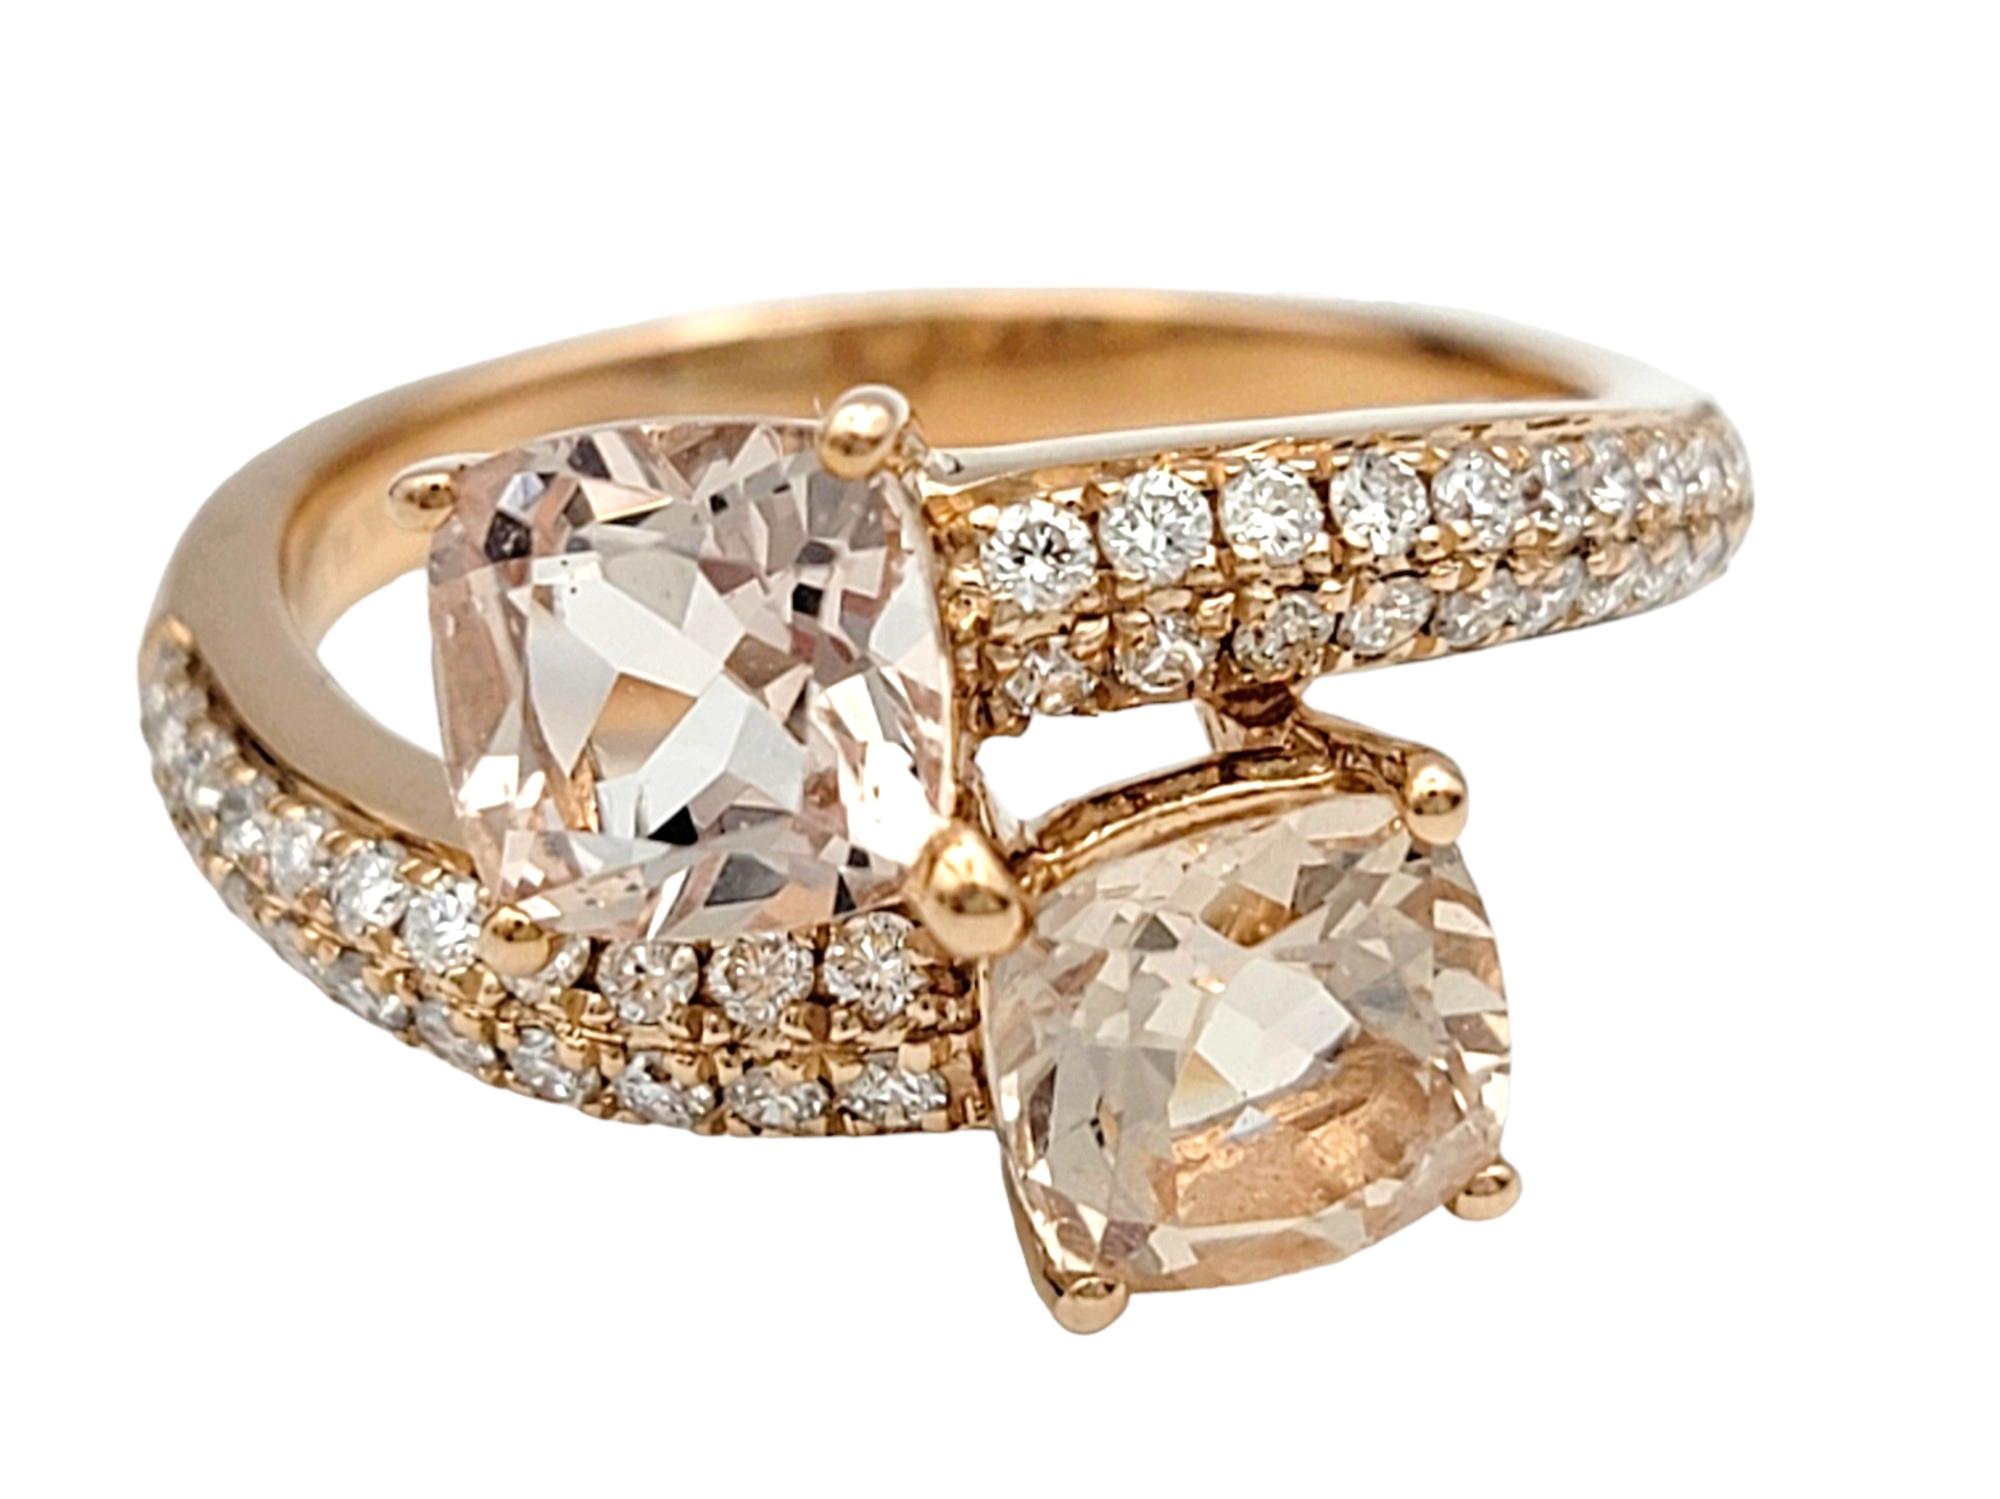 Ring Size: 6.75

This stunning morganite and diamond bypass ring set in 14 karat rose gold presents a captivating display of elegance and sophistication. At the heart of the design, two larger cushion-cut morganite gemstones command attention with